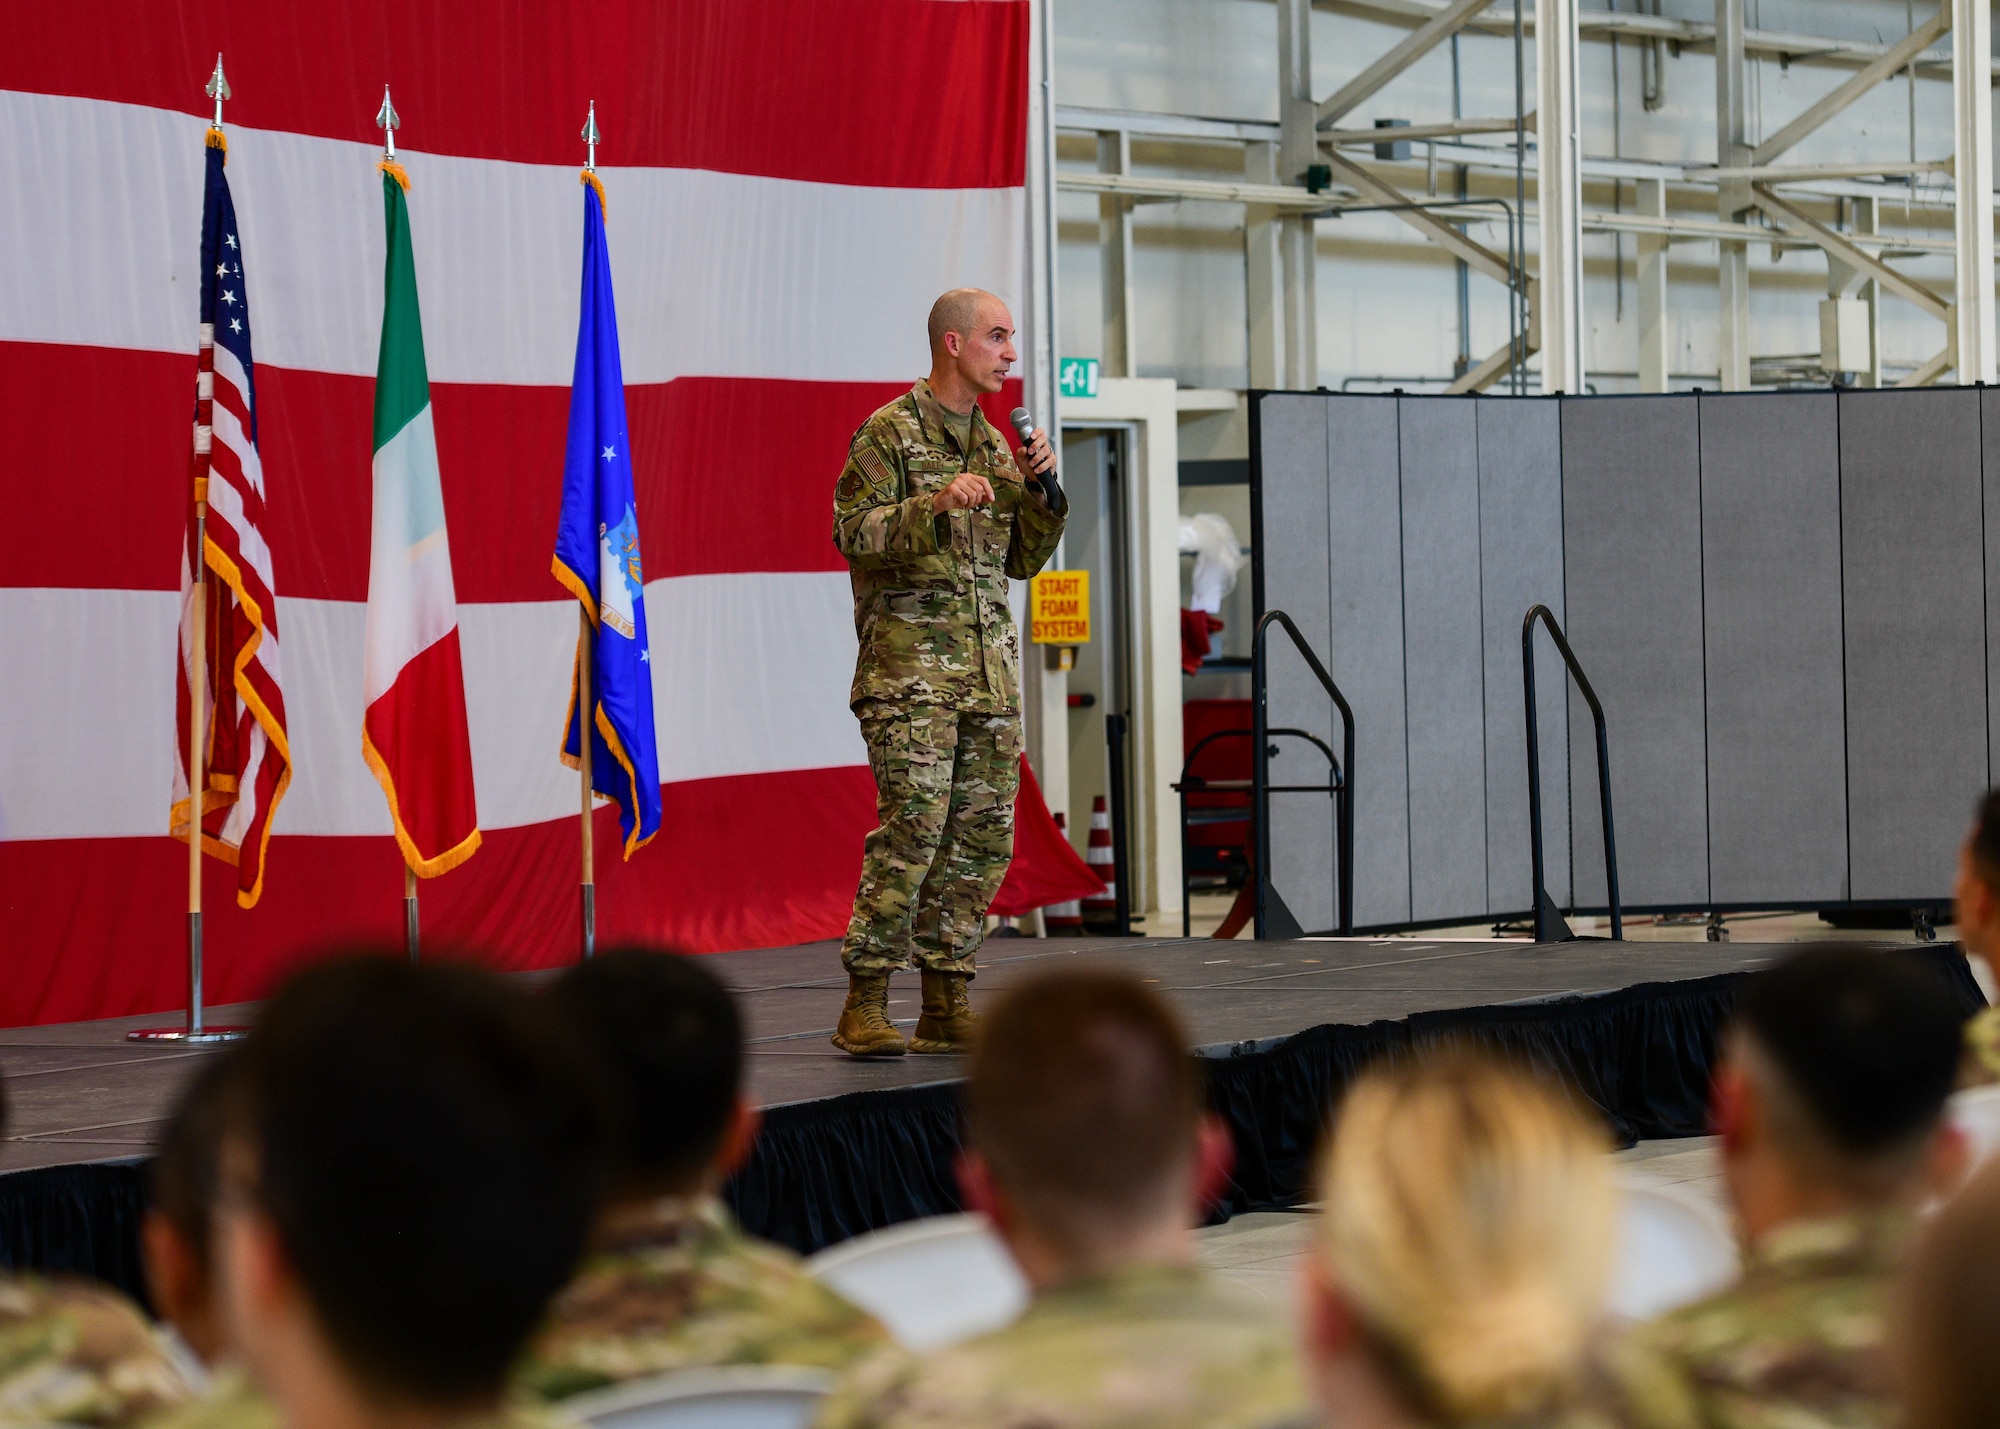 U.S. Air Force Brig. Gen. Jason Bailey, 31st Fighter Wing commander, gives his final all-call to the 31st FW at Aviano Air Base, Italy, June 30, 2022. During the all-call, Bailey had a question and answer session. With approximately 4,200 active-duty military members, nearly 300 U.S. civilians and 700 Italian civilian employees, the wing conducts and supports air combat operations, and maintains munitions for NATO. (U.S. Air Force photo by Senior Airman Brooke Moeder)